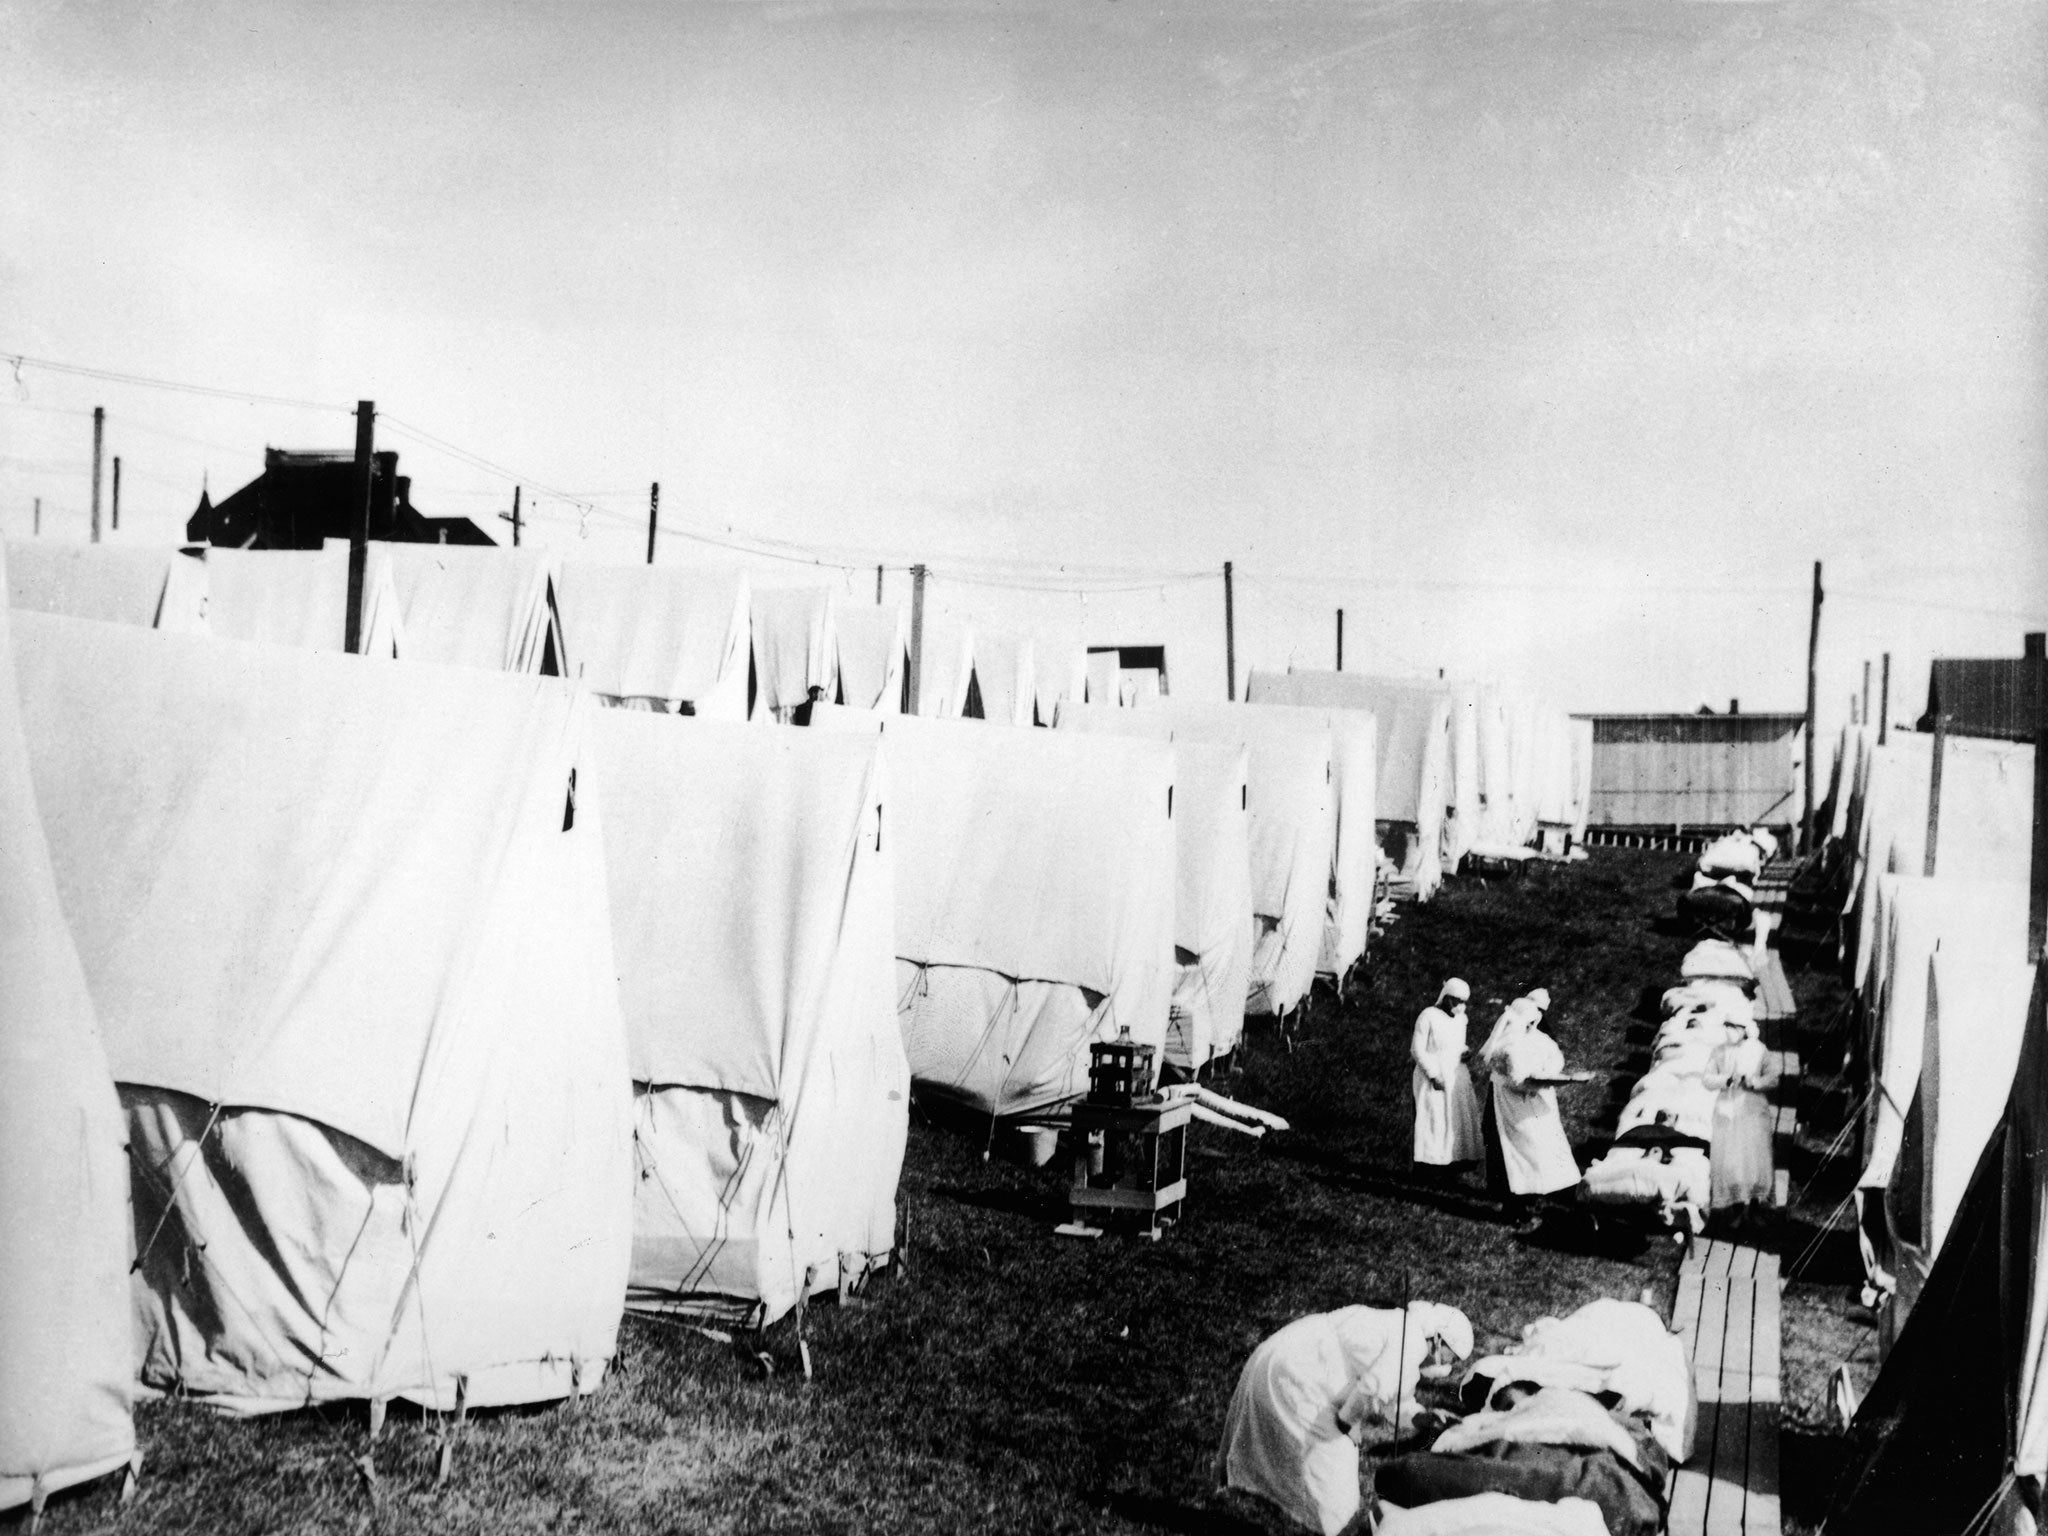 Masked doctors and nurses treat flu patients lying on cots and in outdoor tents at a hospital camp during the influenza epidemic of 1918